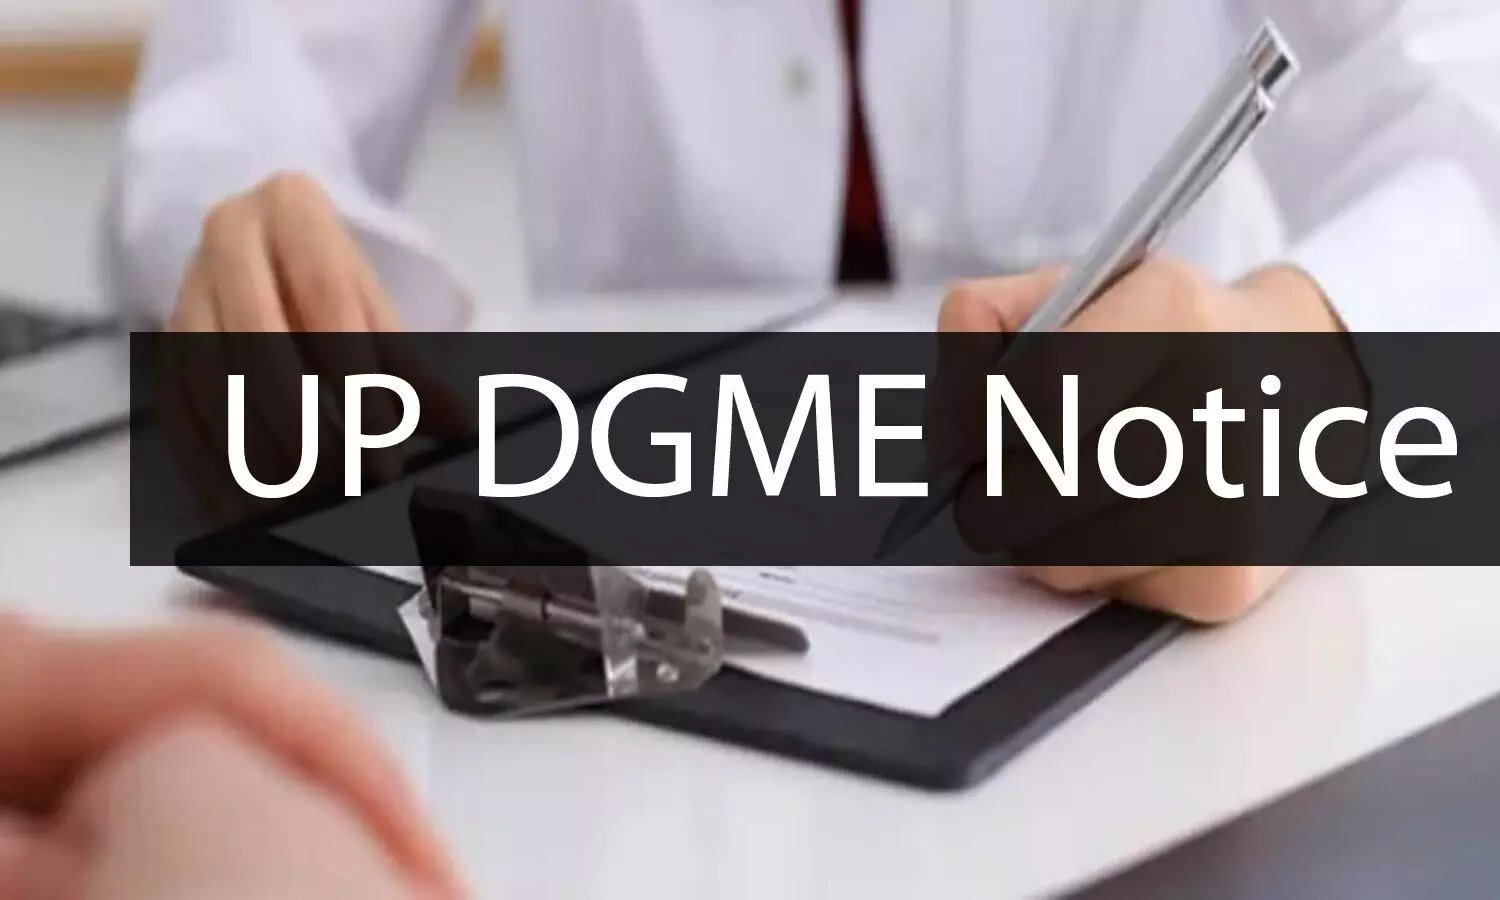 UP DMGE releases admission schedule for PCPNDT course 2020, Details